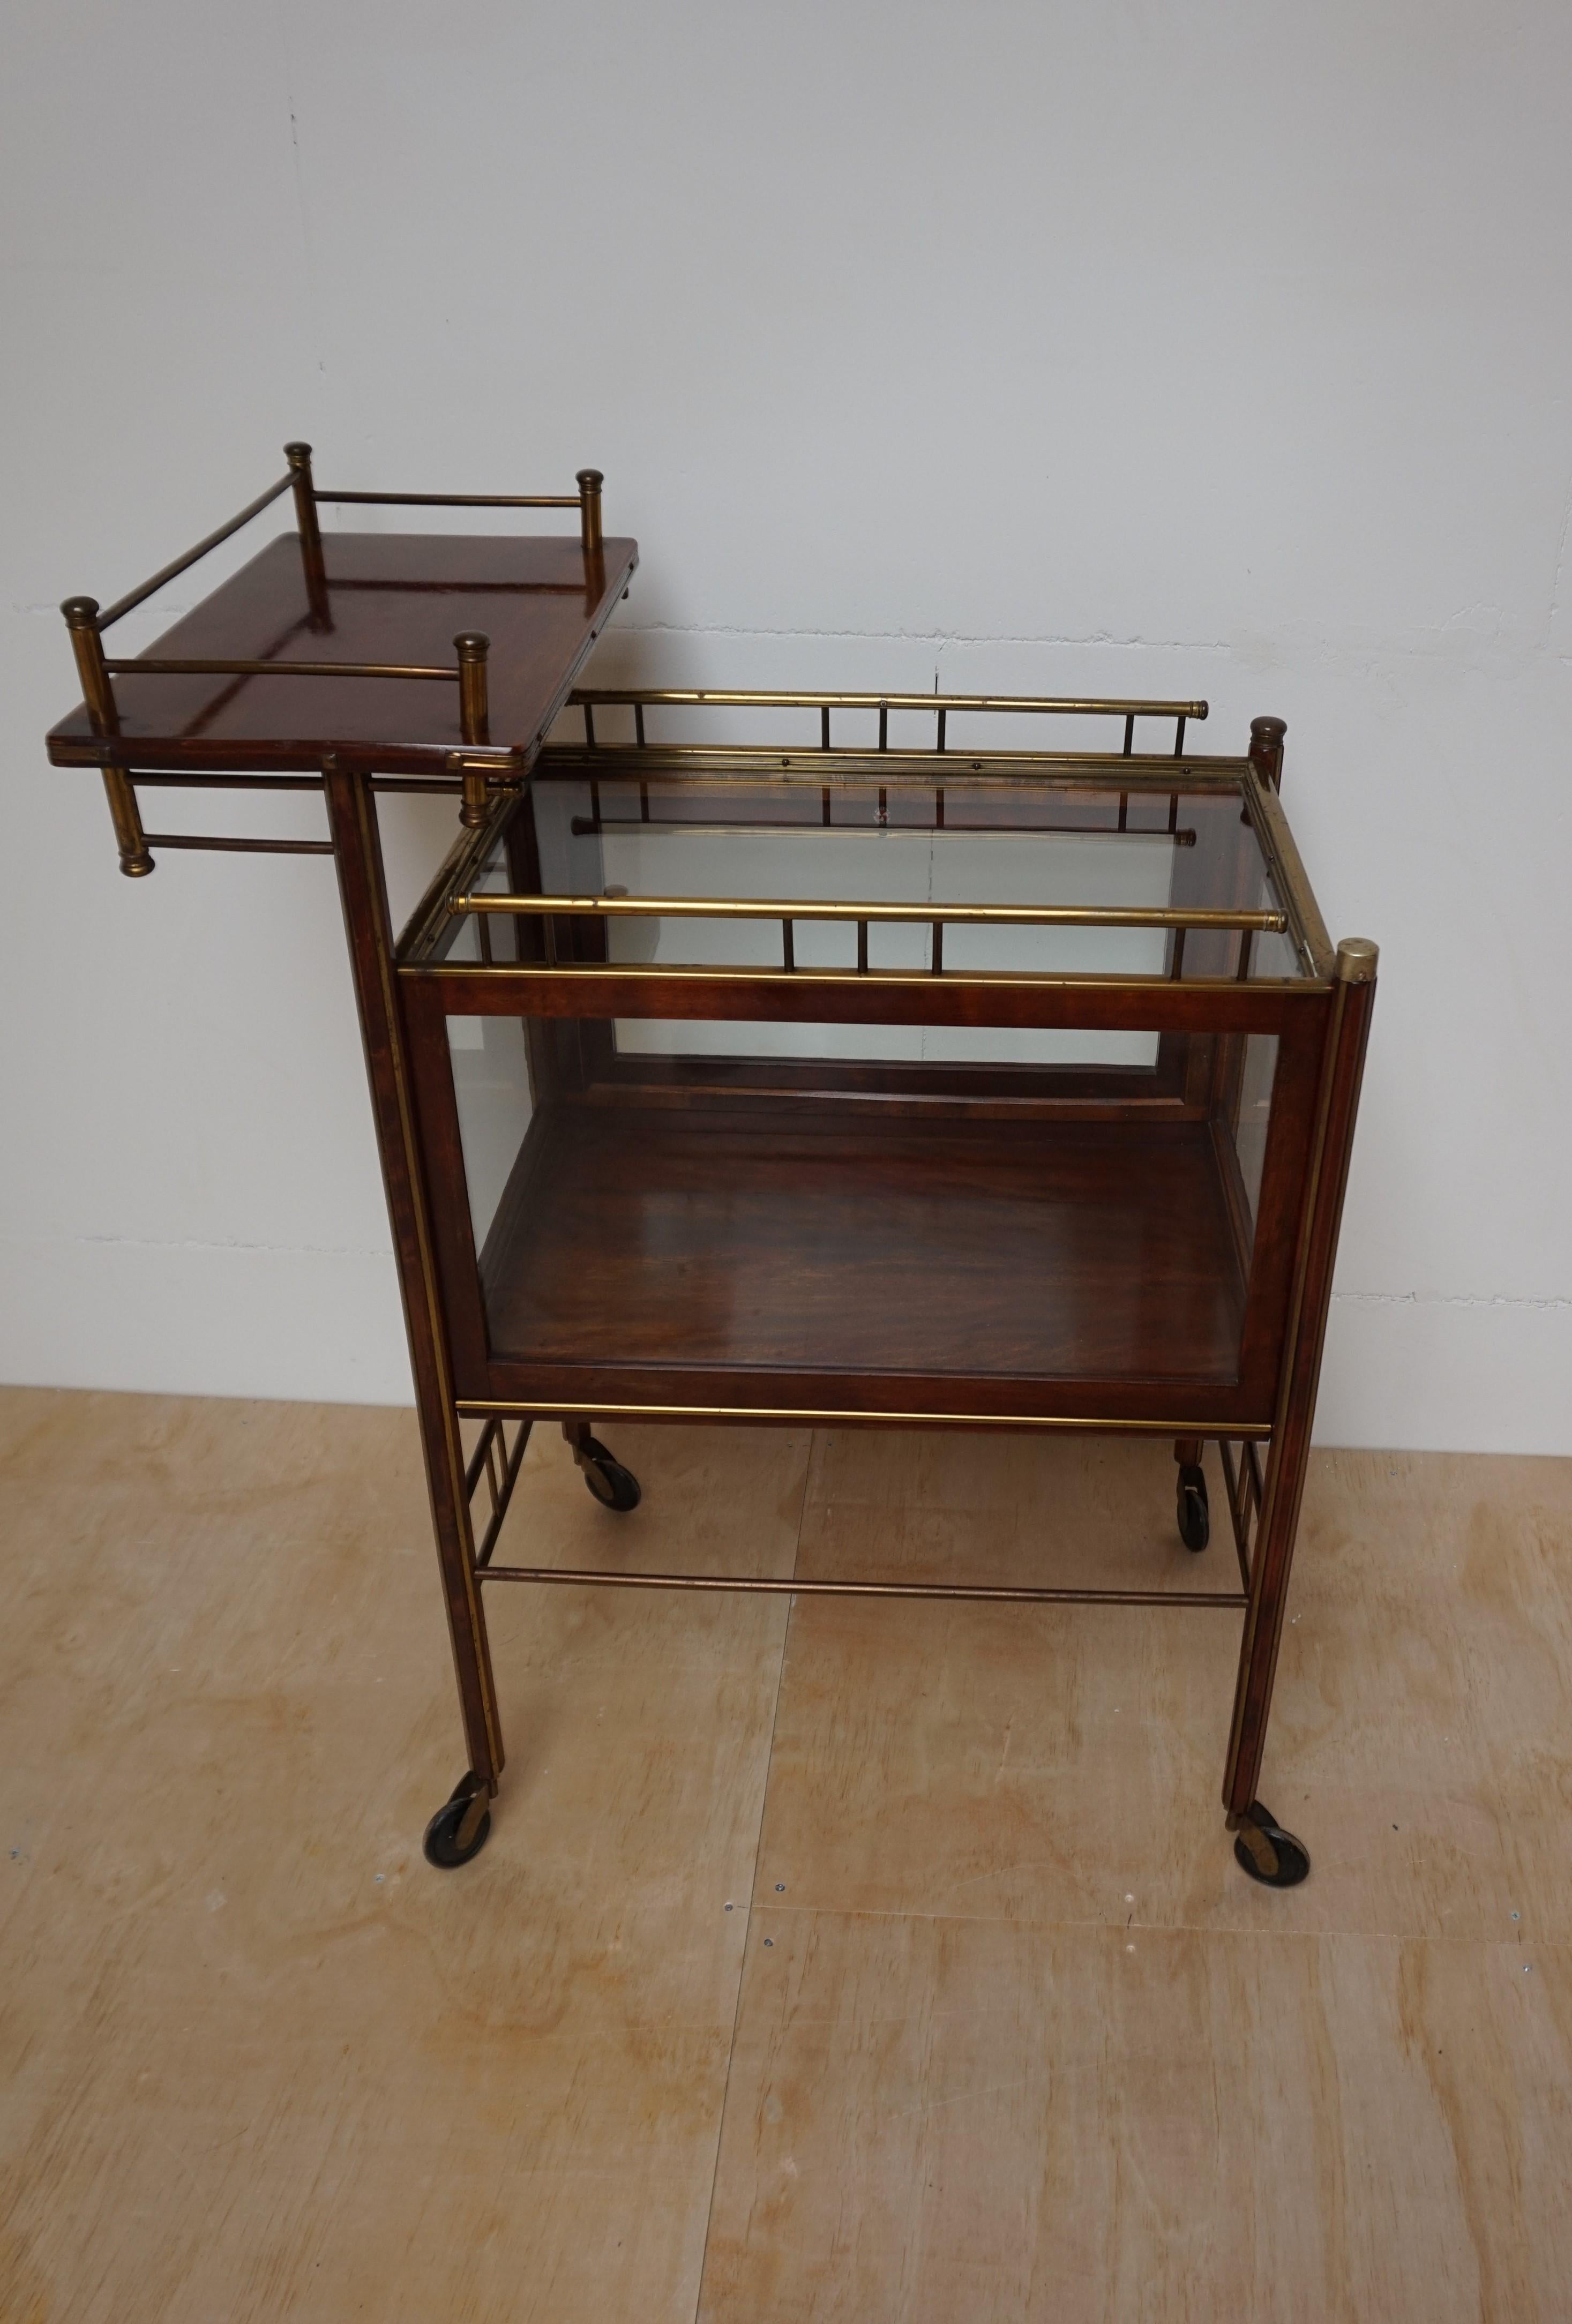 Stunning Asymmetrical Arts & Crafts Wood, Brass & Glass Drinks Trolley or Cart For Sale 10